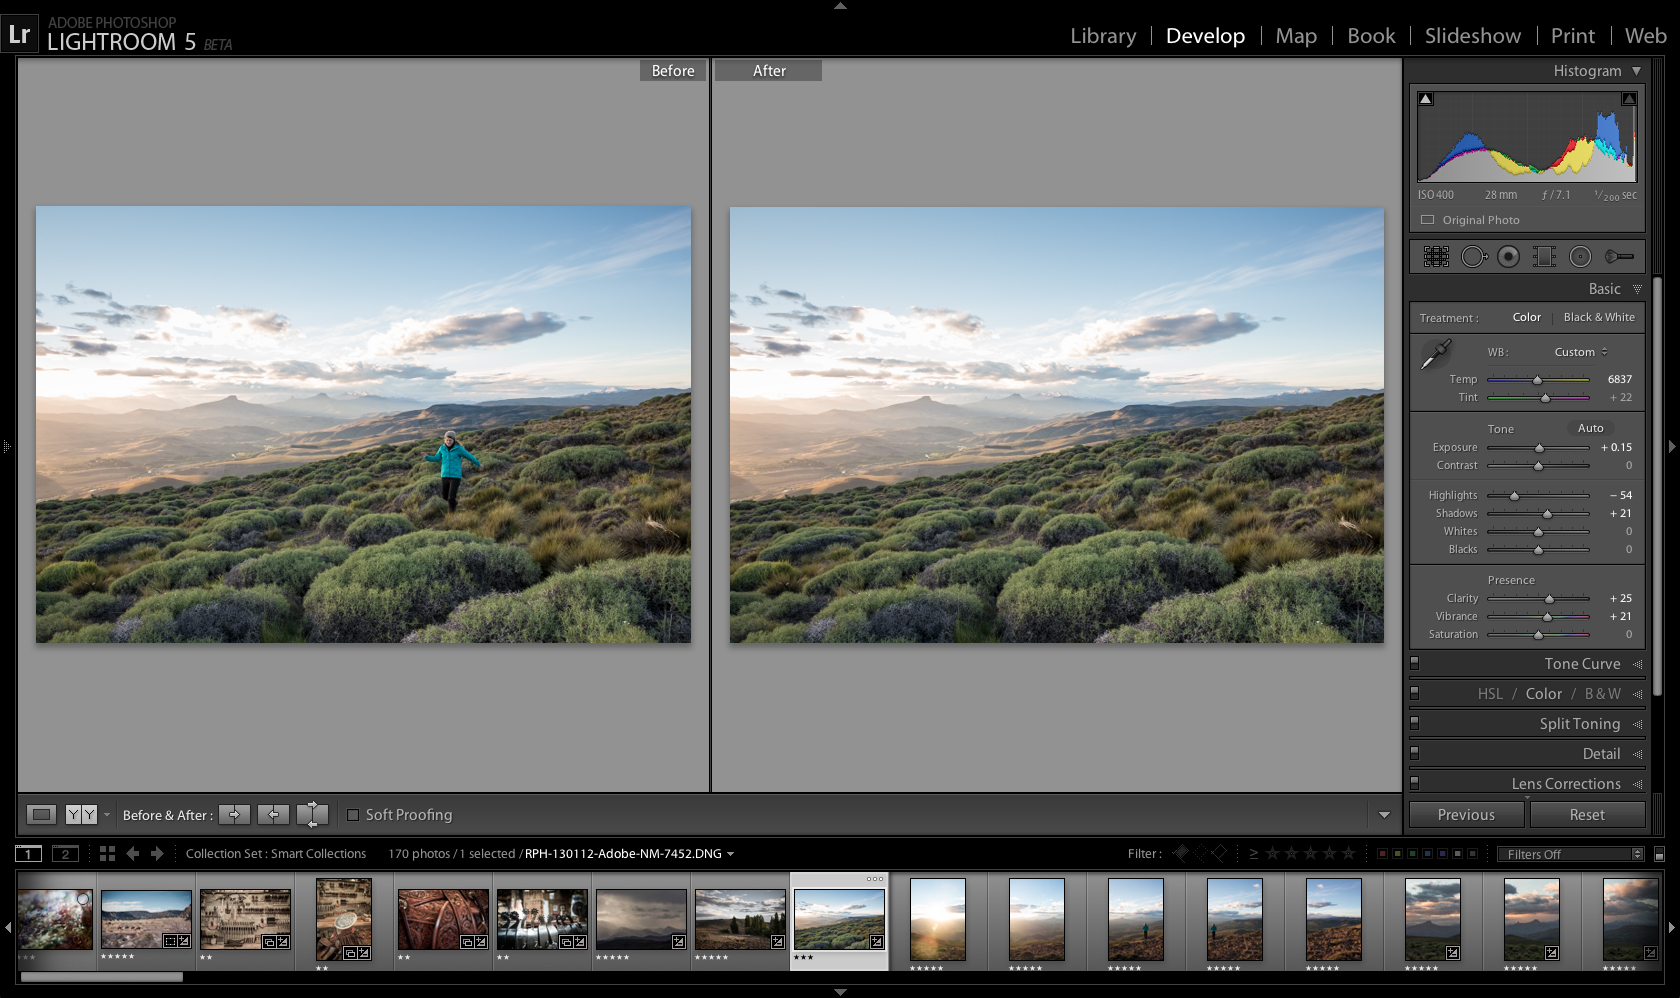 does lightroom 5.3 works with windows 10